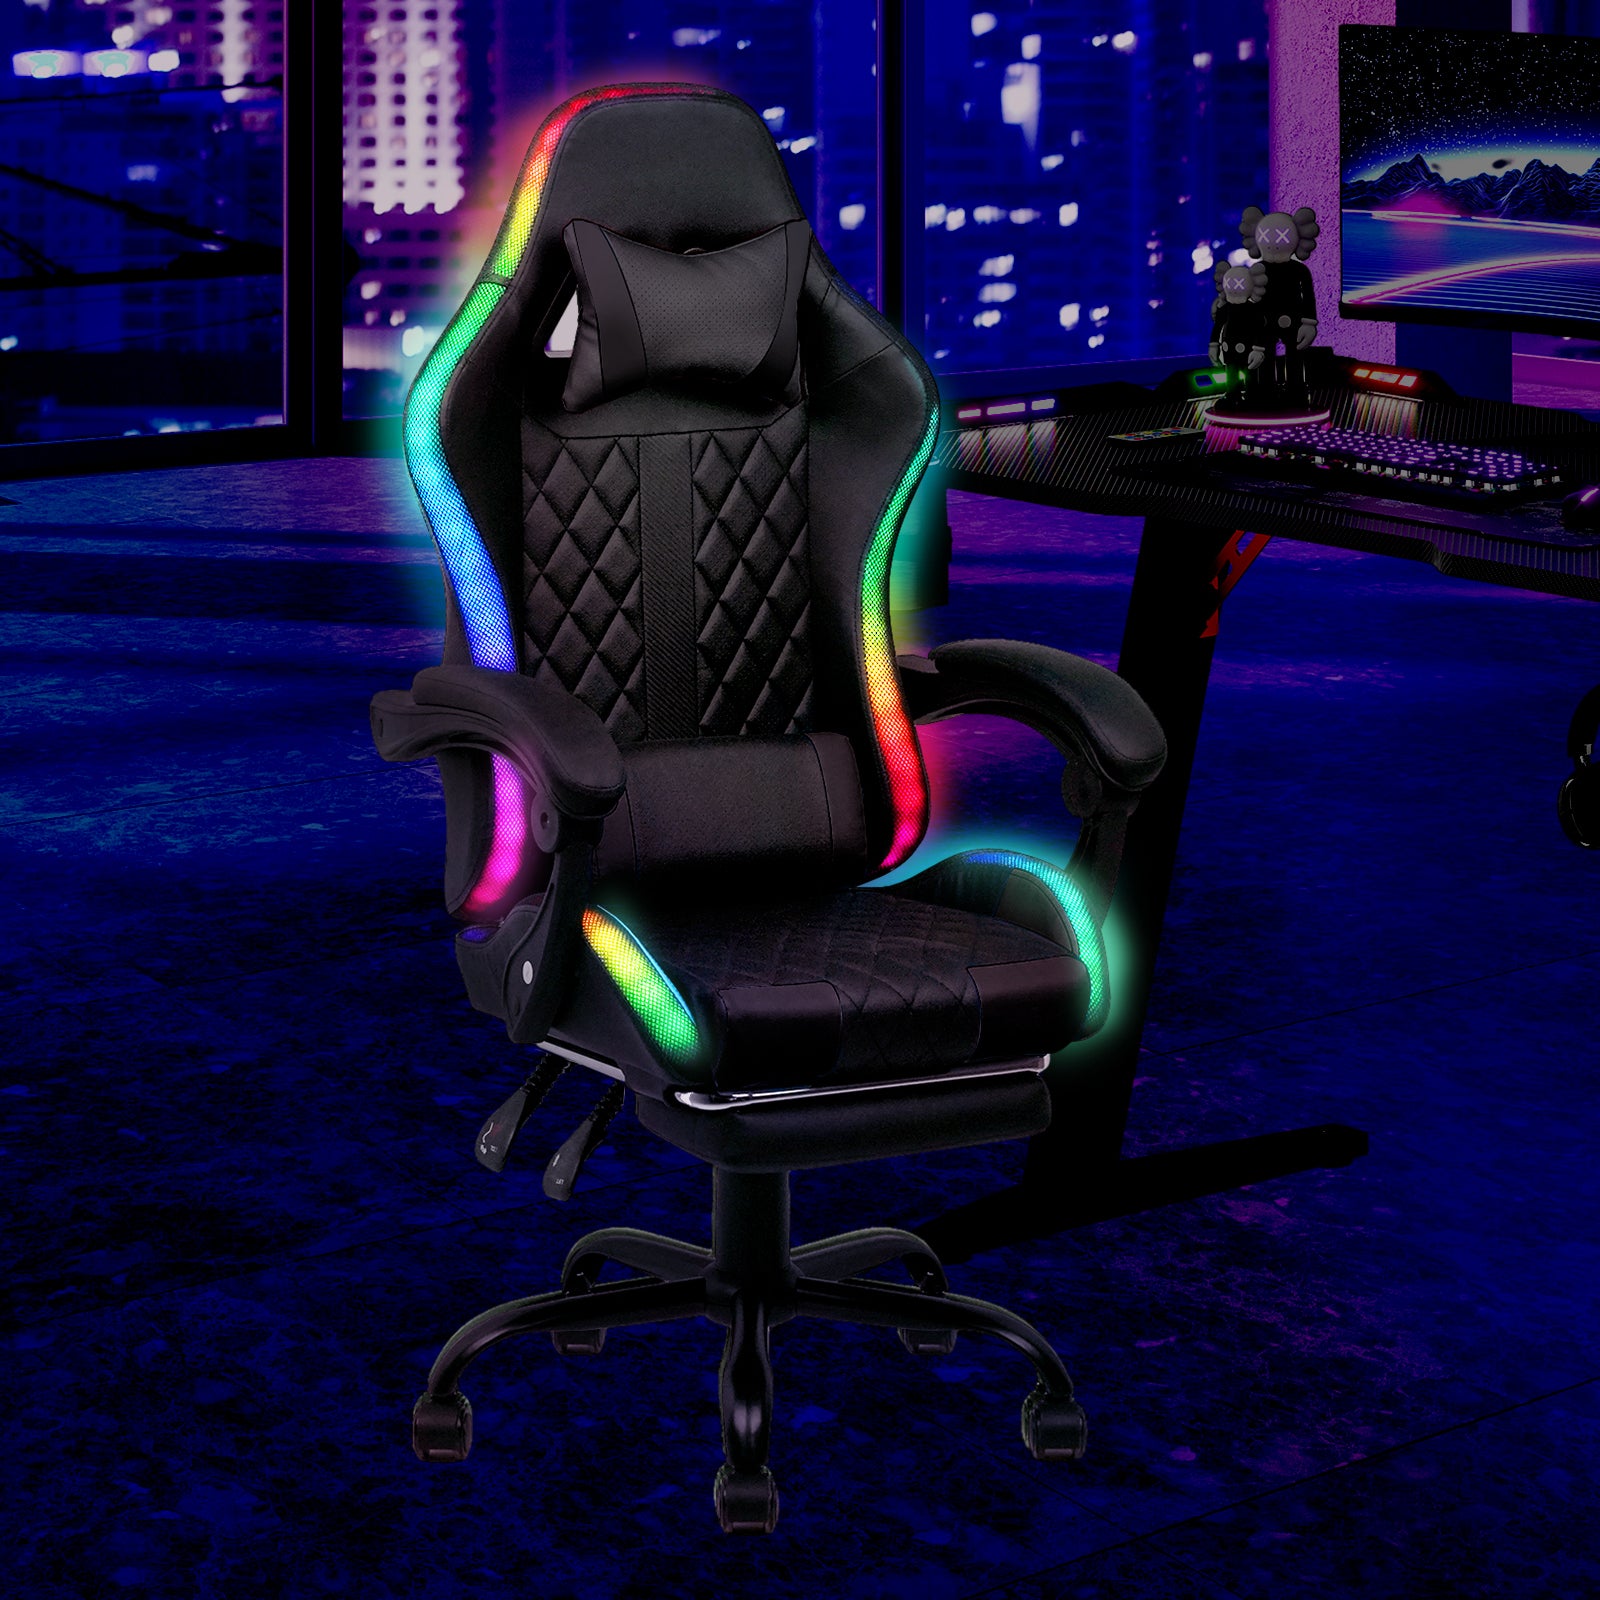 Advwin Gaming Chair 12 RGB LED Massage Ergonomic Executive Office Chair Computer Racing Recliner Footrest Seat Black